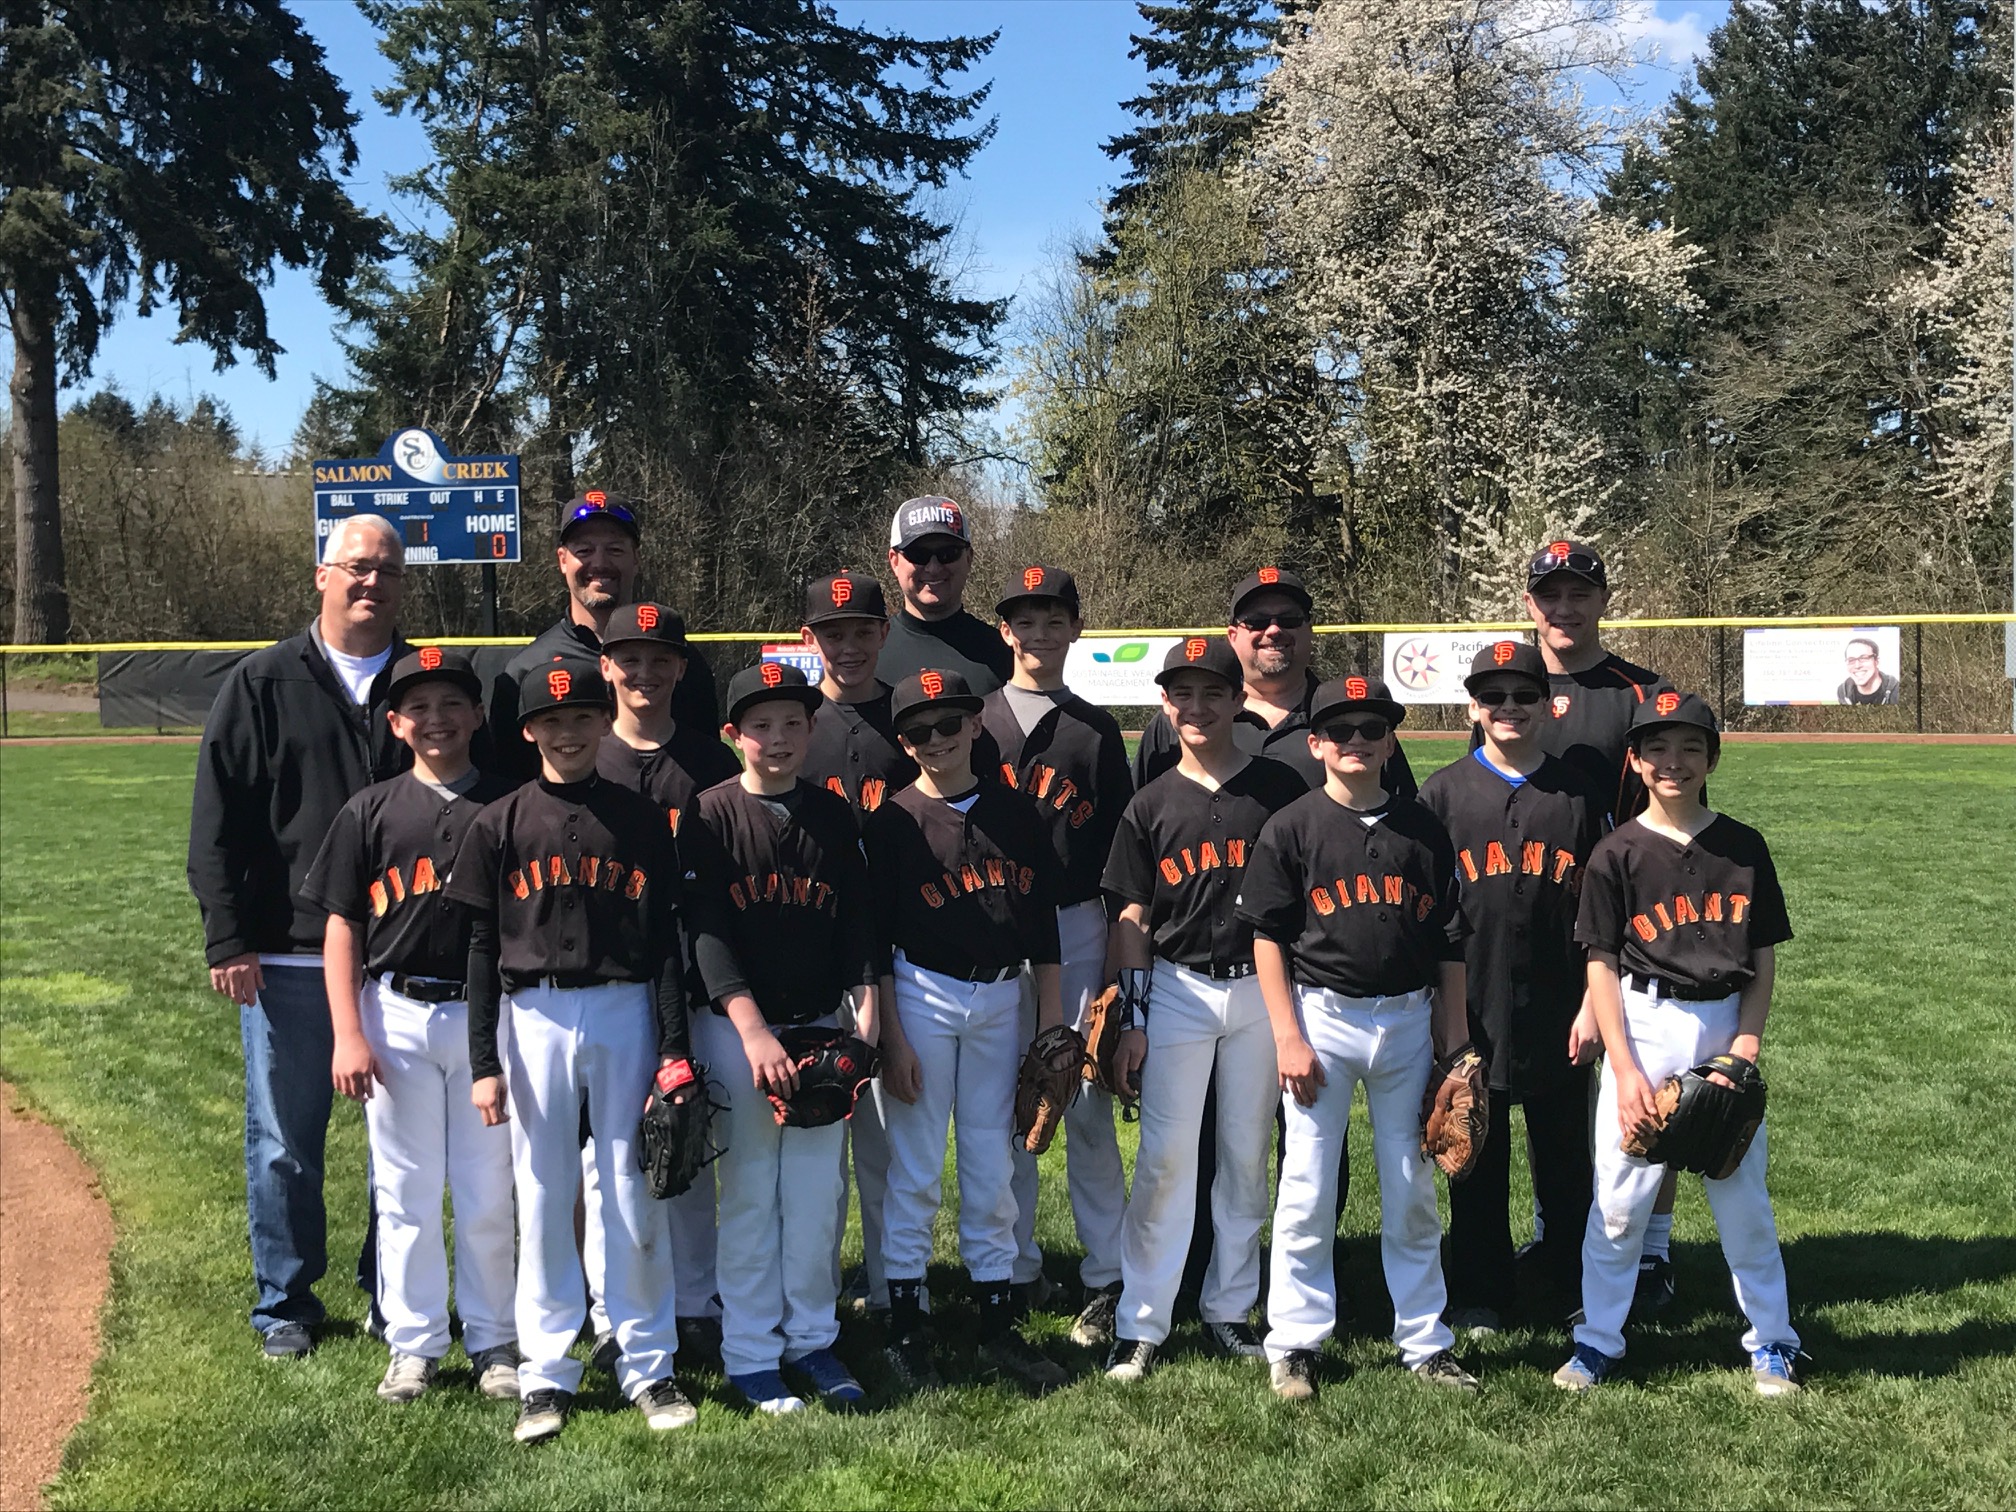 Dr.Bowyer with Salmon Creek Little League Team